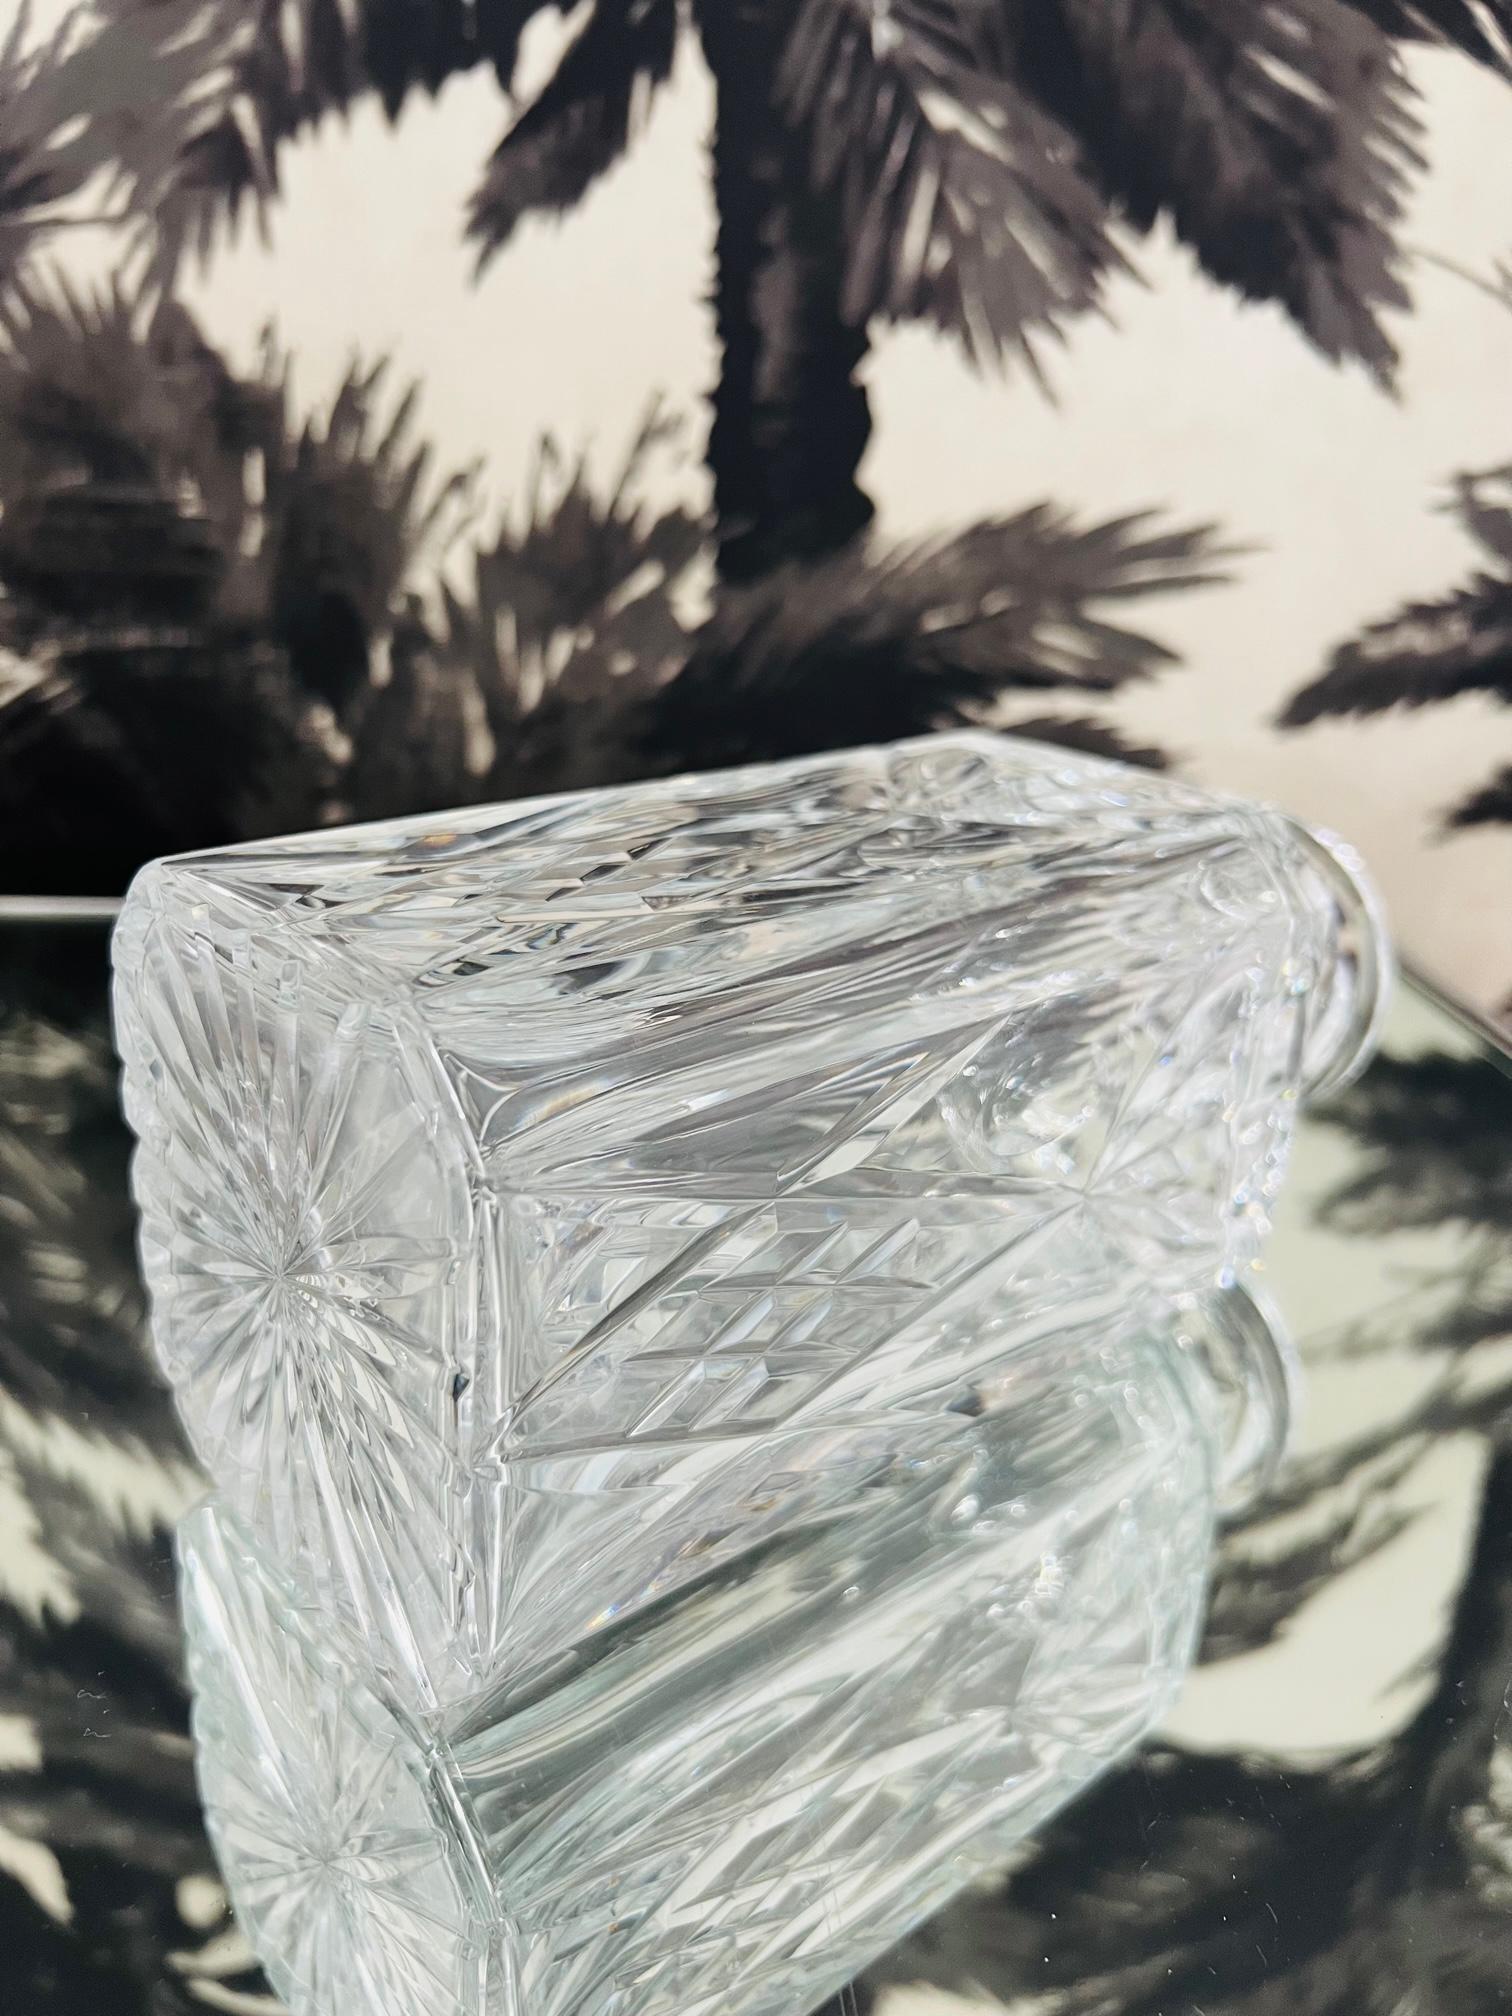 Hand-Crafted Vintage Waterford Crystal Whiskey Decanter with Etched Designs, C. 1980